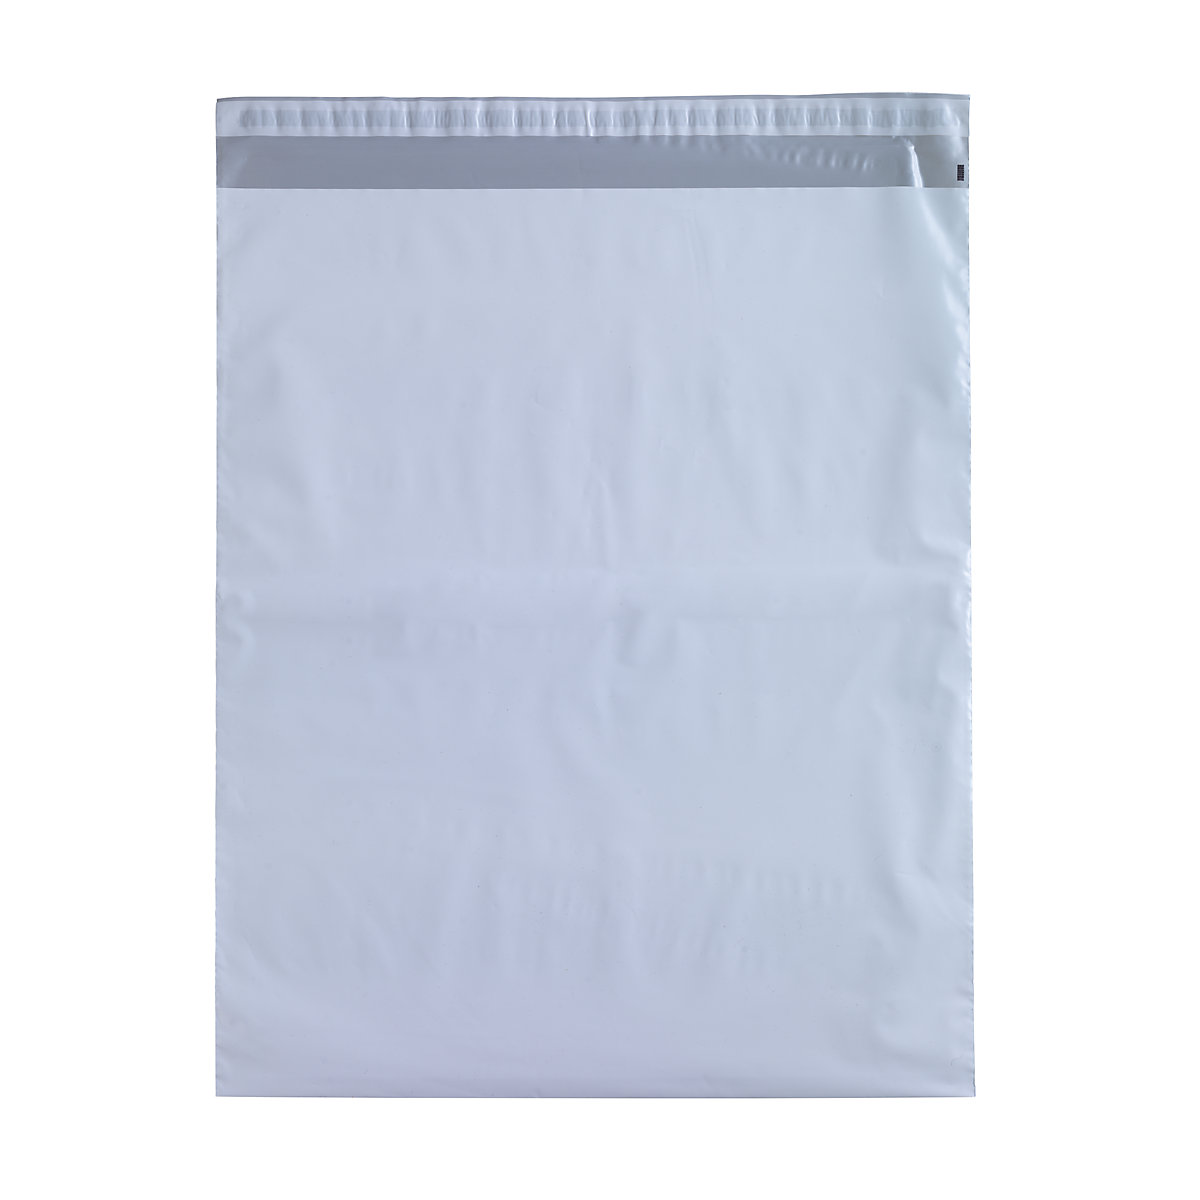 Dispatch bag, non-transparent, single adhesive seal, LxW 500 x 400 mm, pack of 500-6